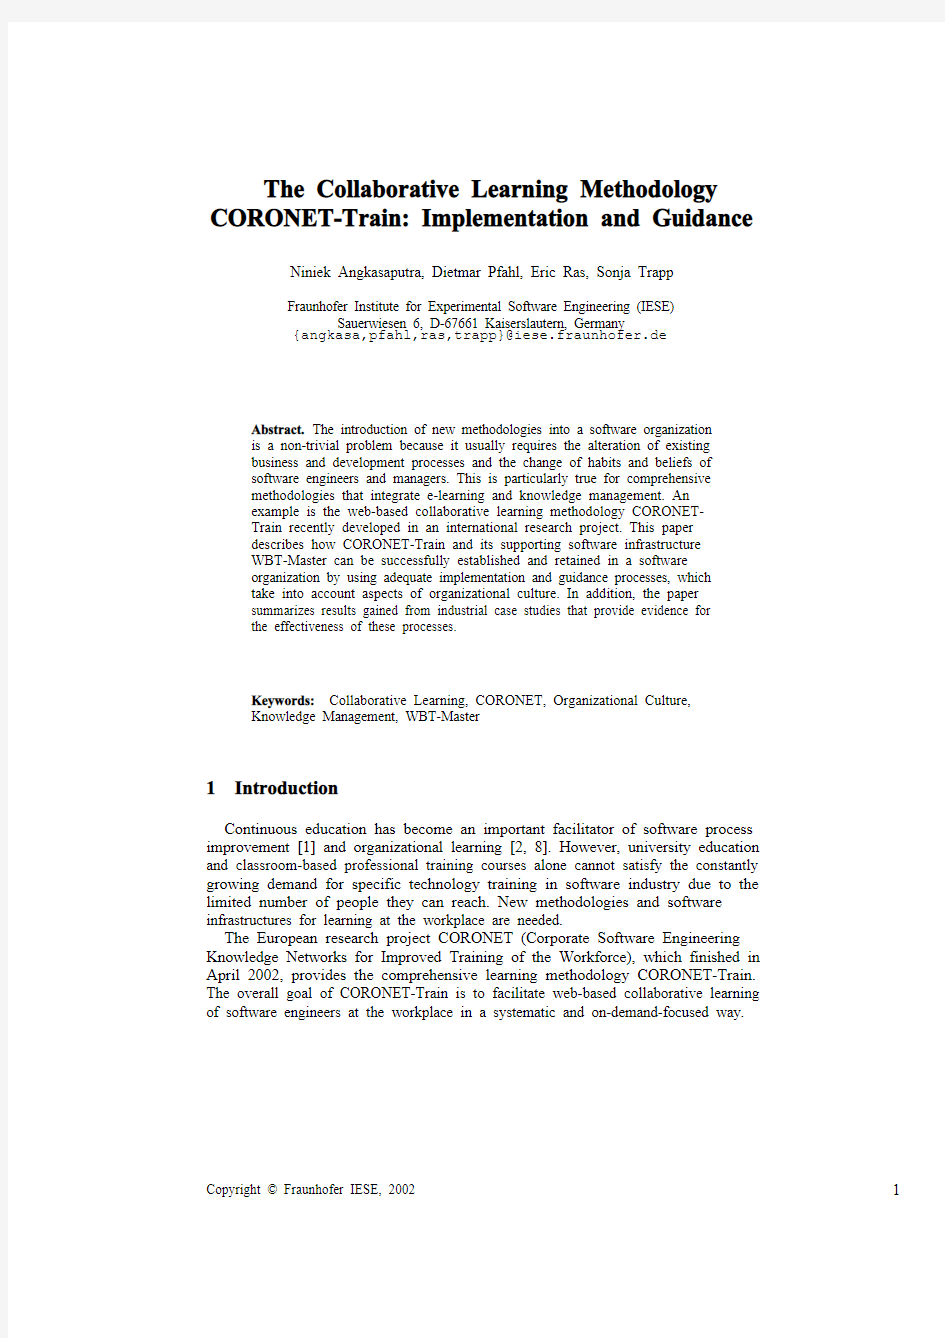 The Collaborative Learning Methodology CORONET-Train Implementation and Guidance